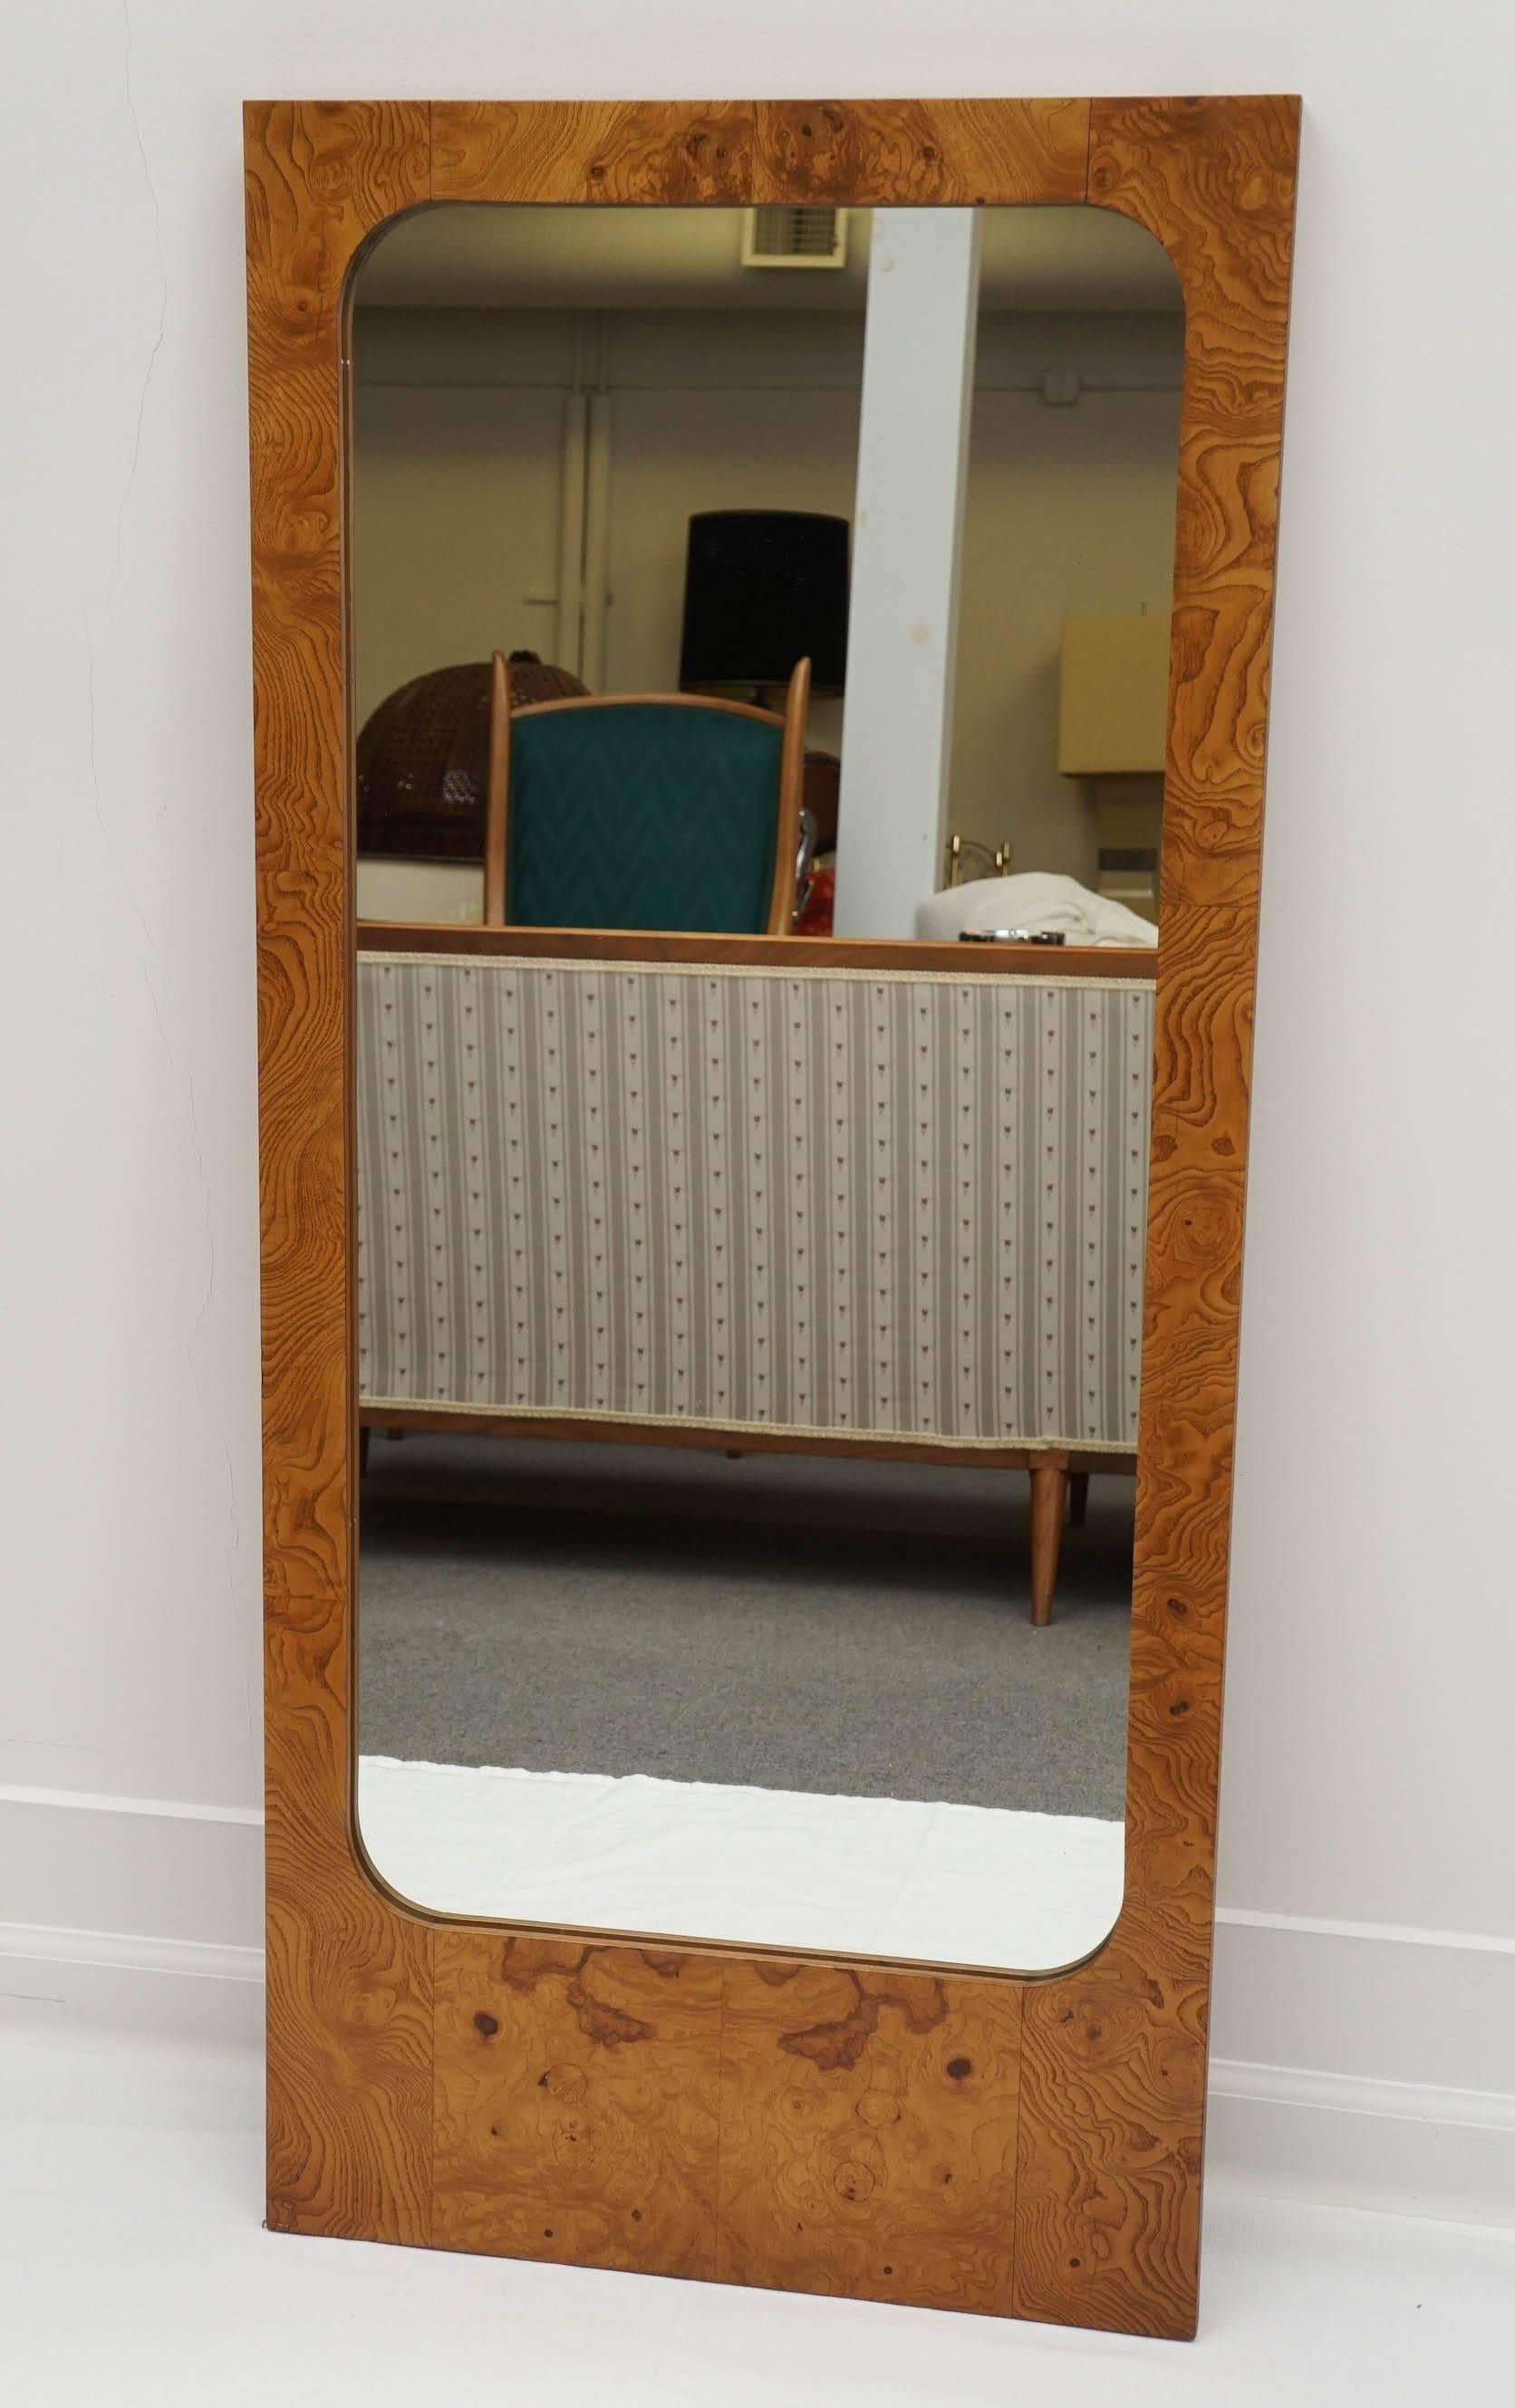 A great 1970s mirror by Milo Baughman.
The wood grain of the burl is beautiful.
Condition is very good.